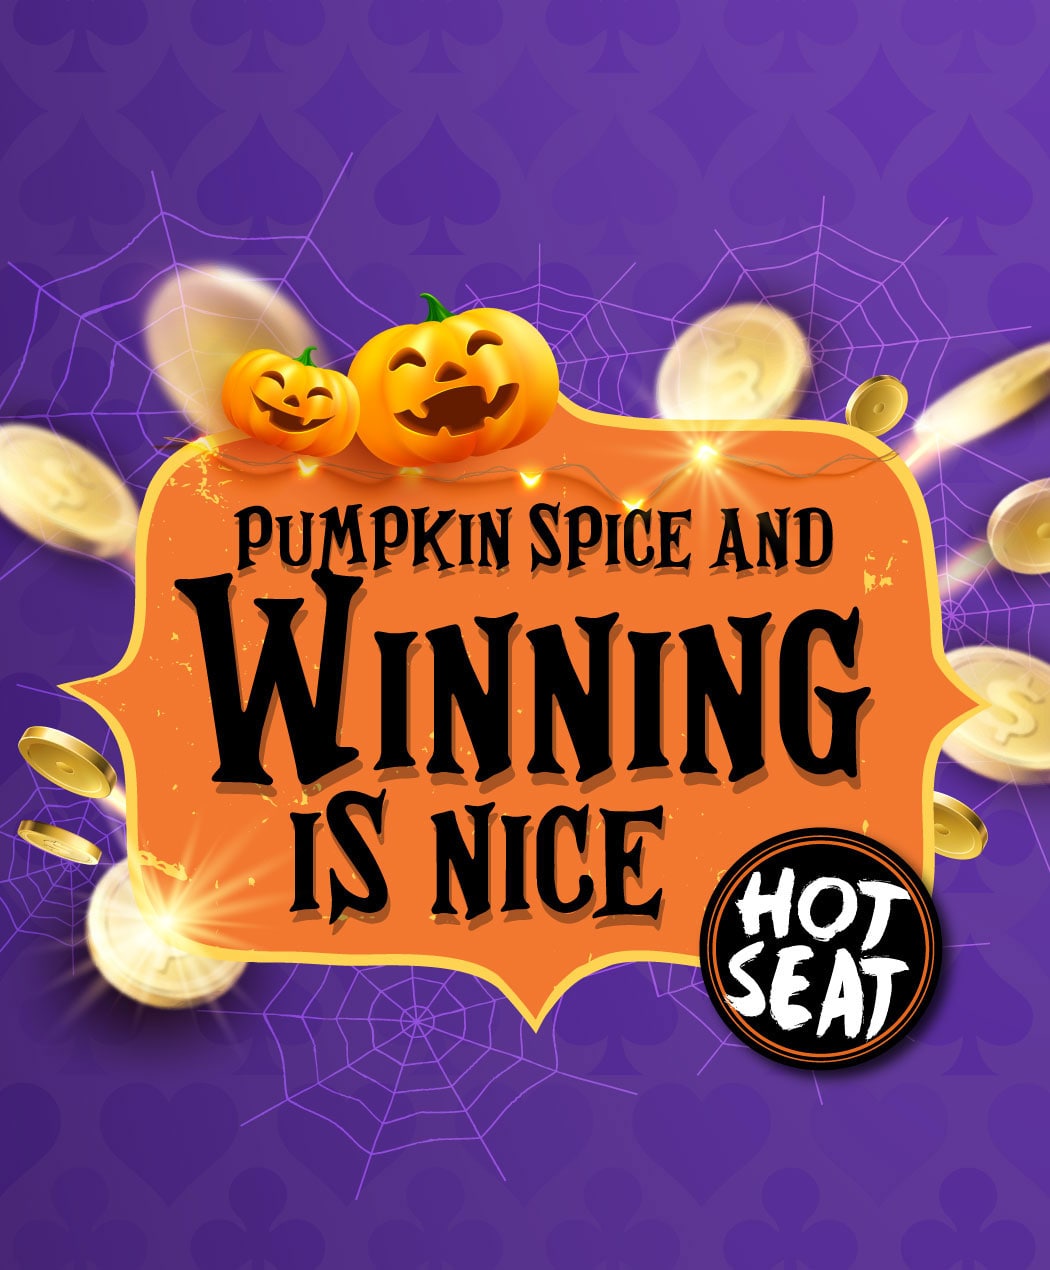 Pumpkin Spice and Winning Is Nice Hot Seat